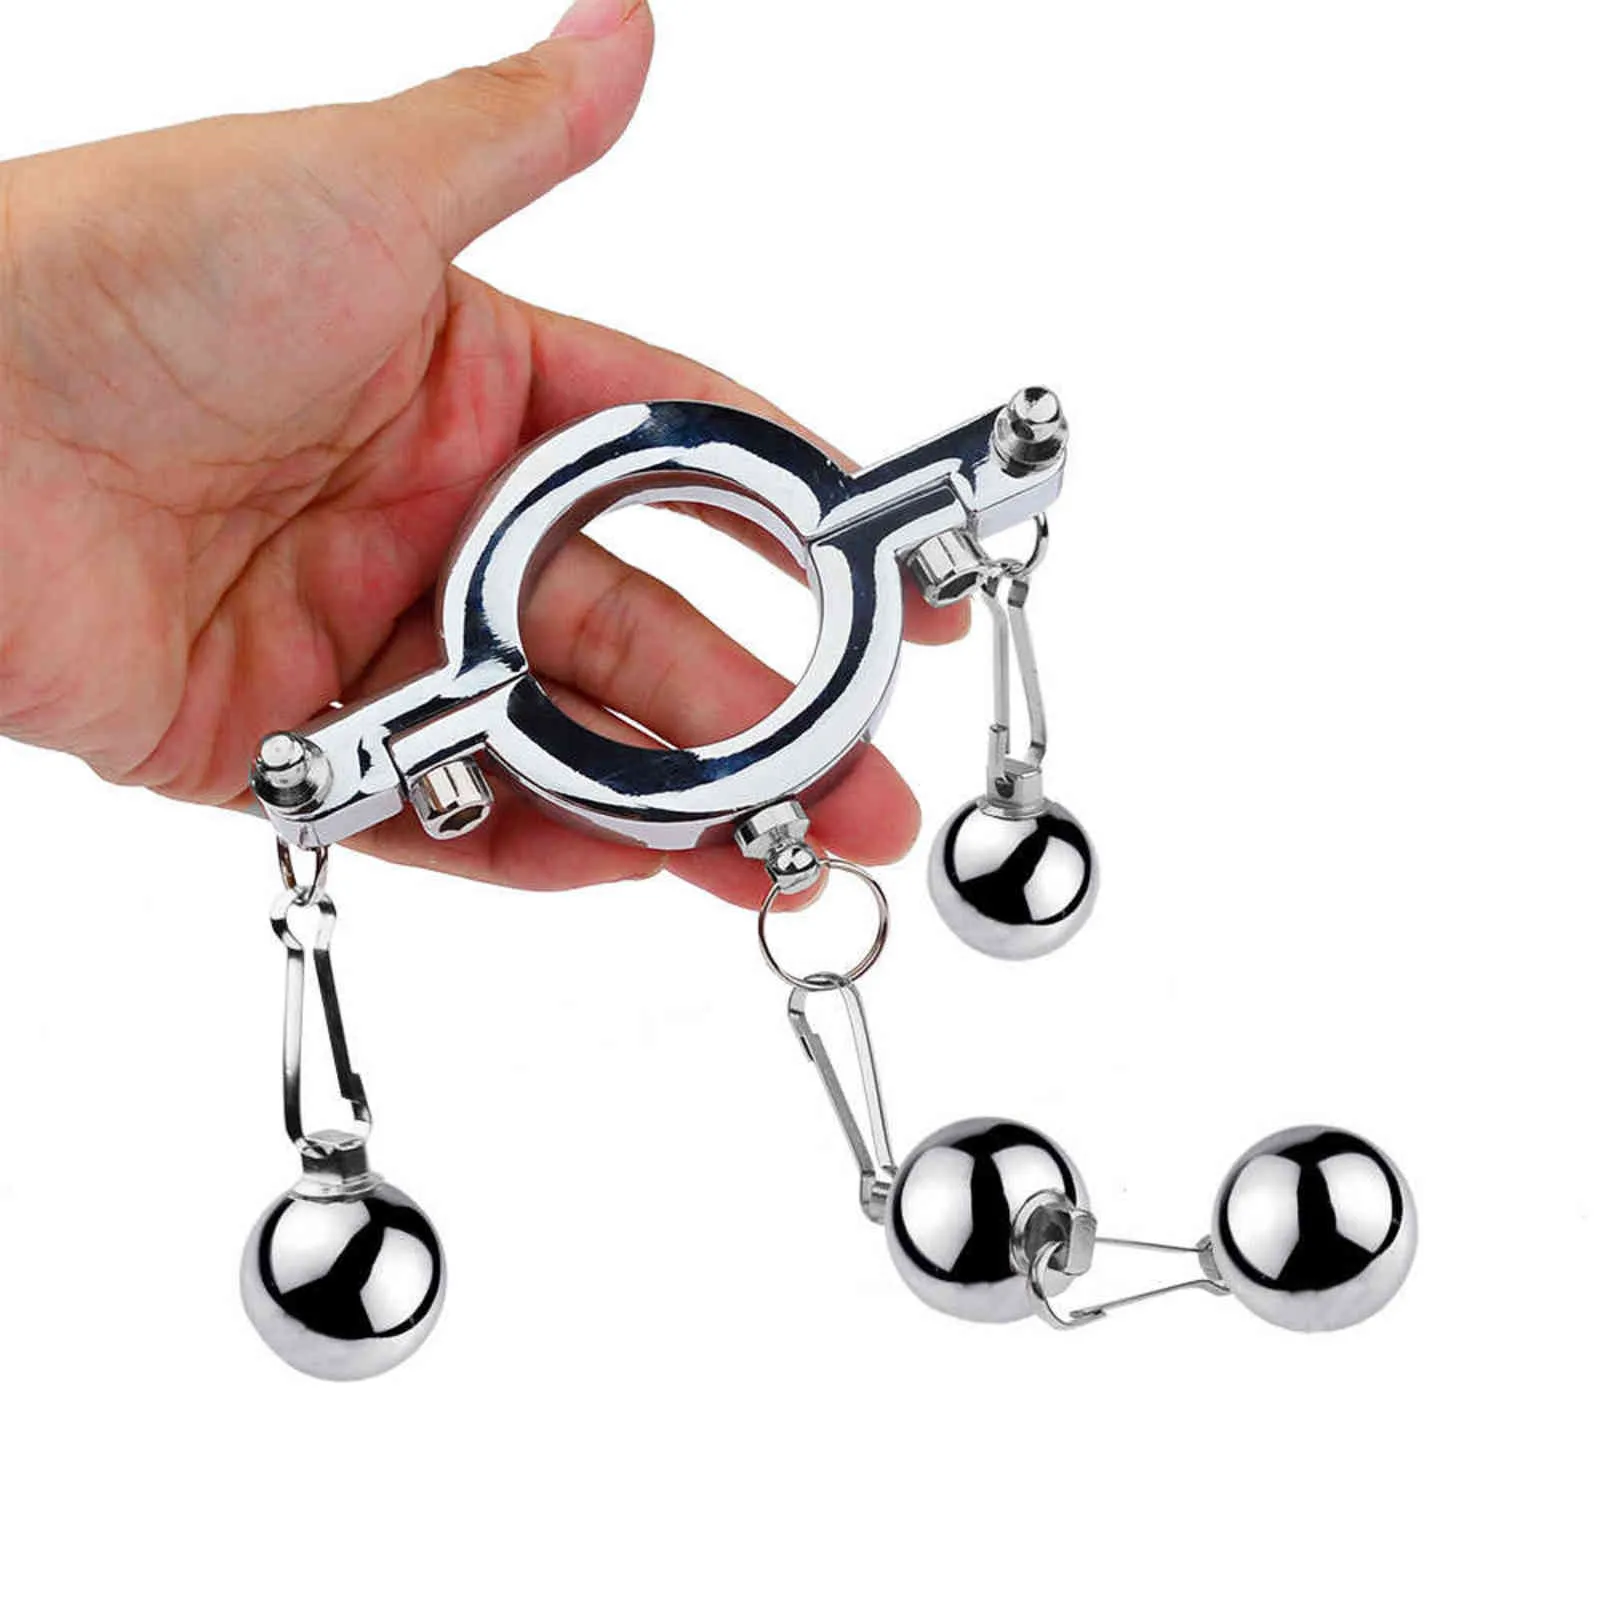 NXYCockrings Drop Ball Penis Ring Metal Weight Hanger l'ingrandimento della barella Extender Cock Chastity Device YS0437 1124